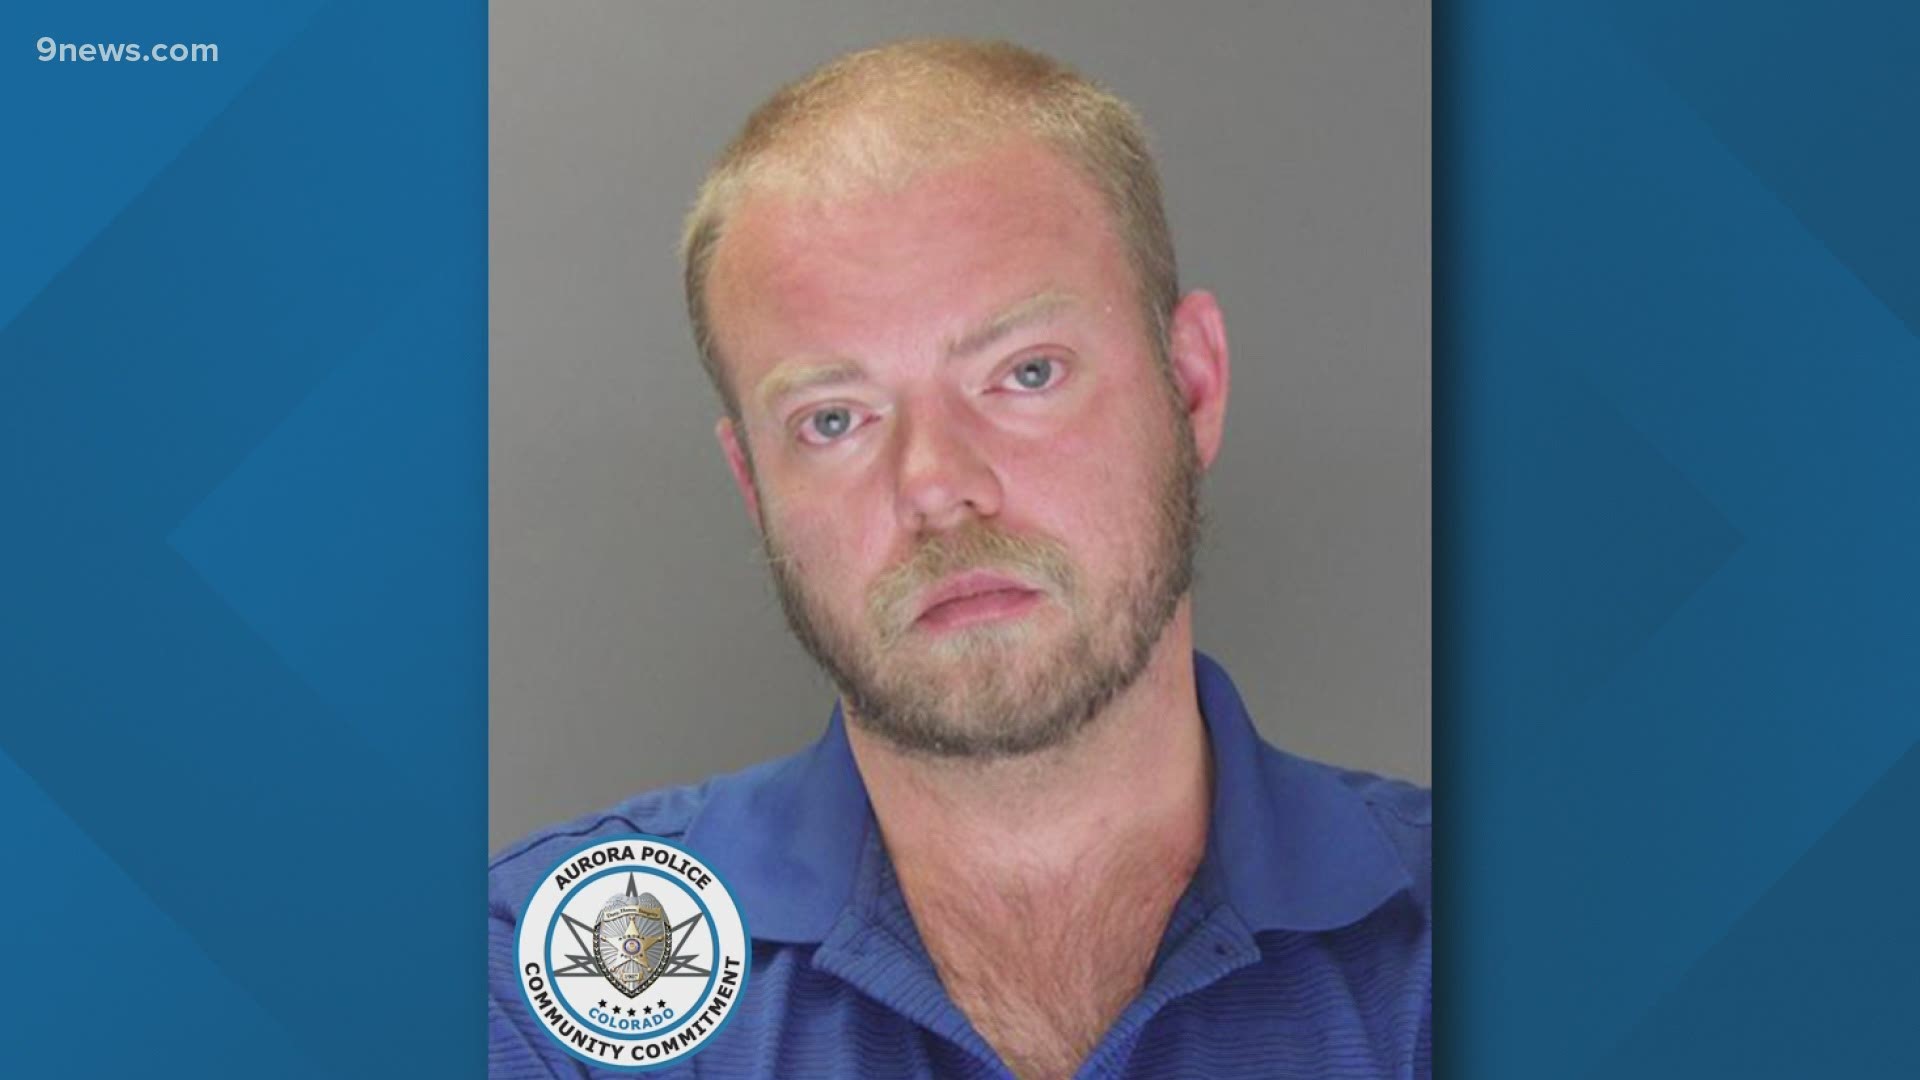 Daniel Pesch, 36, faces a felony criminal mischief charge and two misdemeanor charges in connection with the vandalism spree.